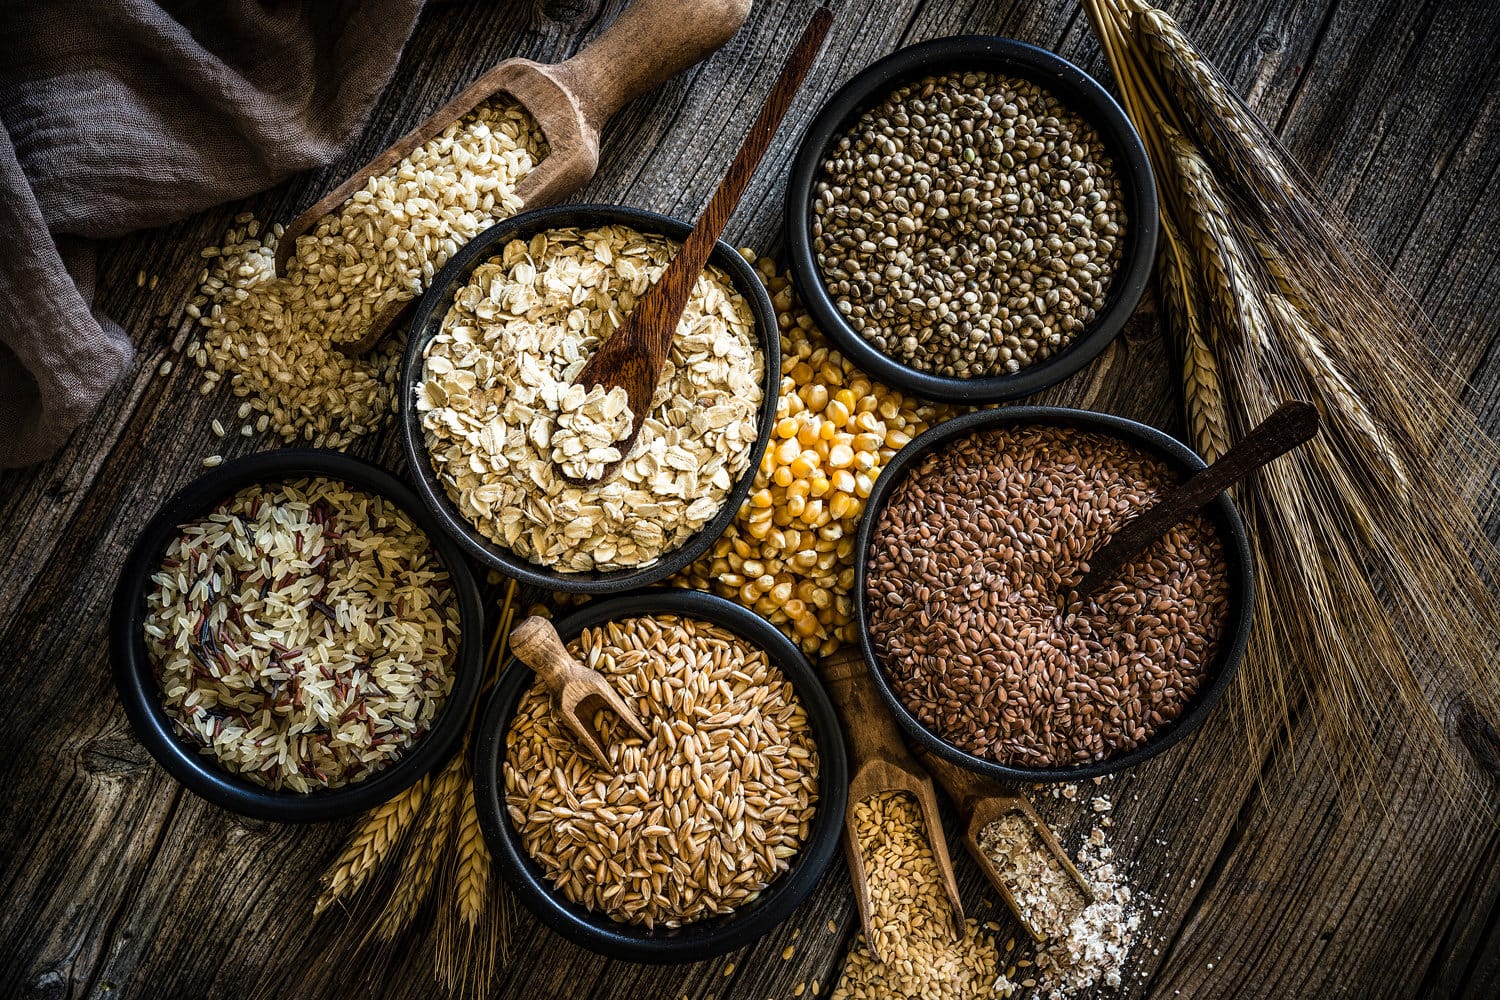 Top view of wholegrain and cereal composition shot on rustic wooden table. This type of food is rich of fiber and is ideal for dieting. The composition includes oat flakes, brown rice, dried corn,spelt, hemp seeds and flax seeds. Predominant color is brown.